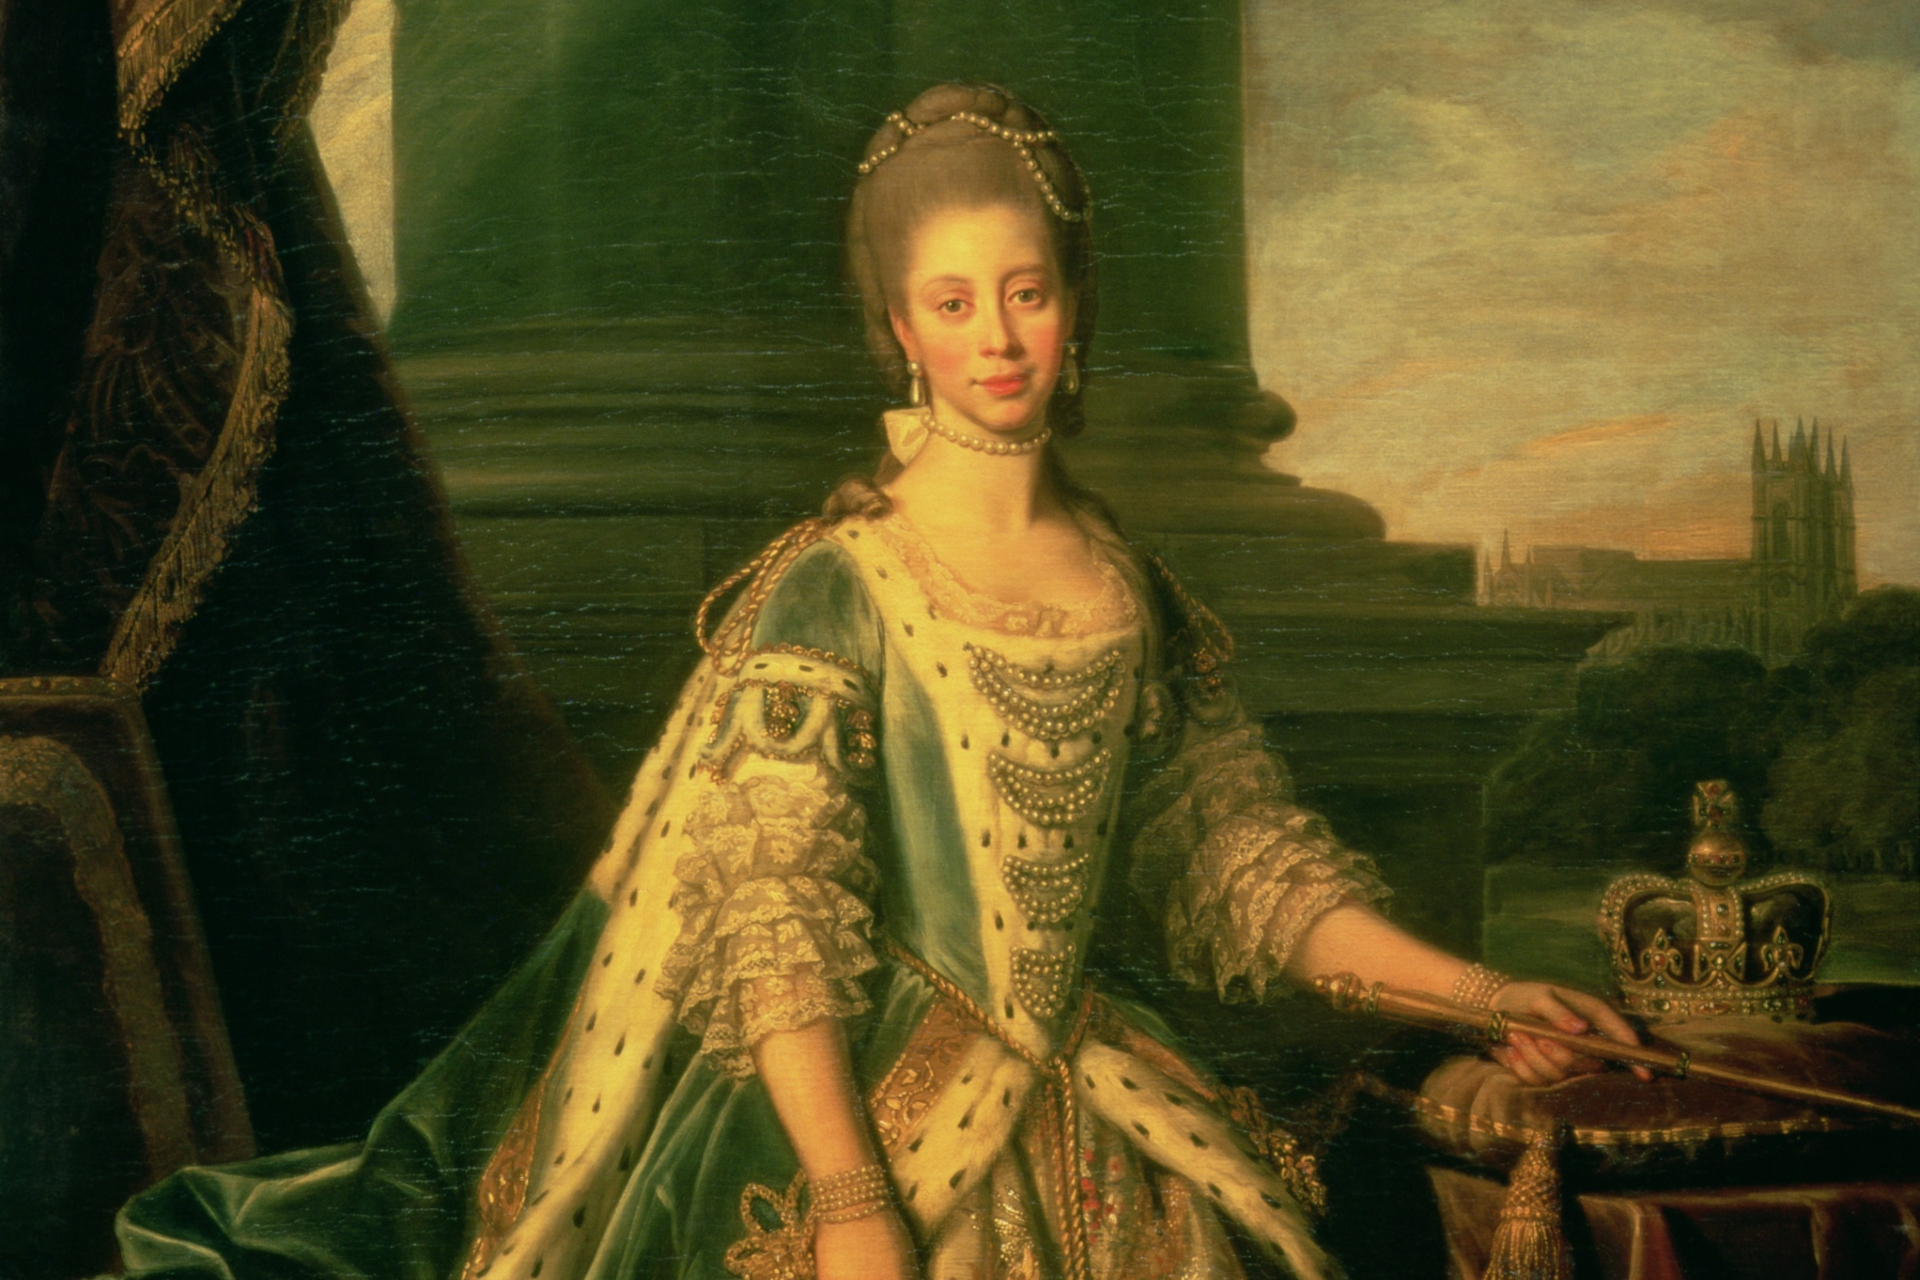 <p>Queen Charlotte made a point of providing her daughters with a full education, which was not customary in Georgian times. "I am of the opinion that if women had the same advantages as men in their education, they would do just as well," she allegedly claimed. A woman ahead of her time.</p>